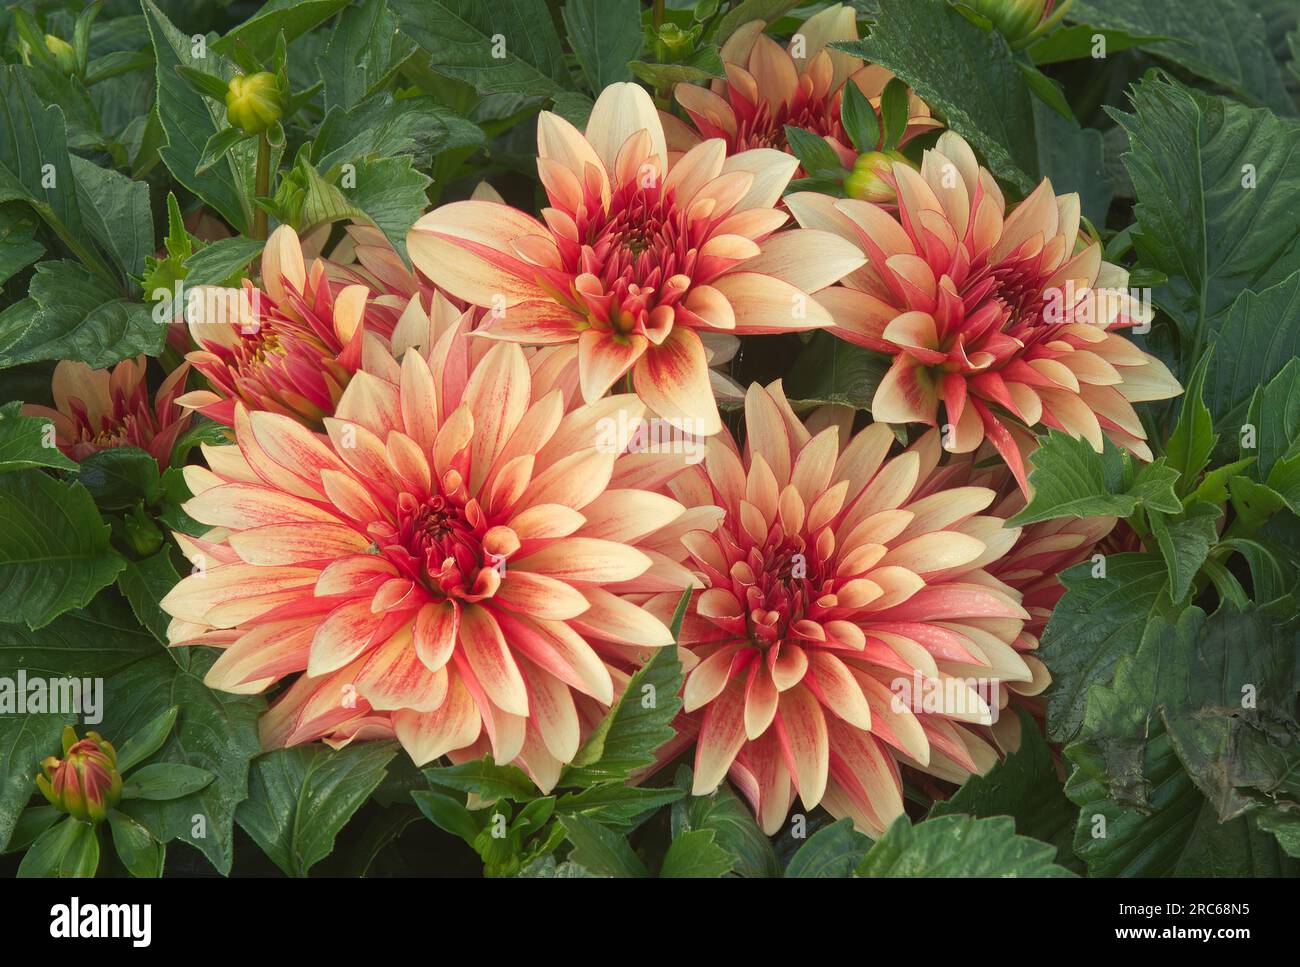 The group of blossoms of flowering Dahlia plant in the garden. Closeup with no people arround. Stock Photo